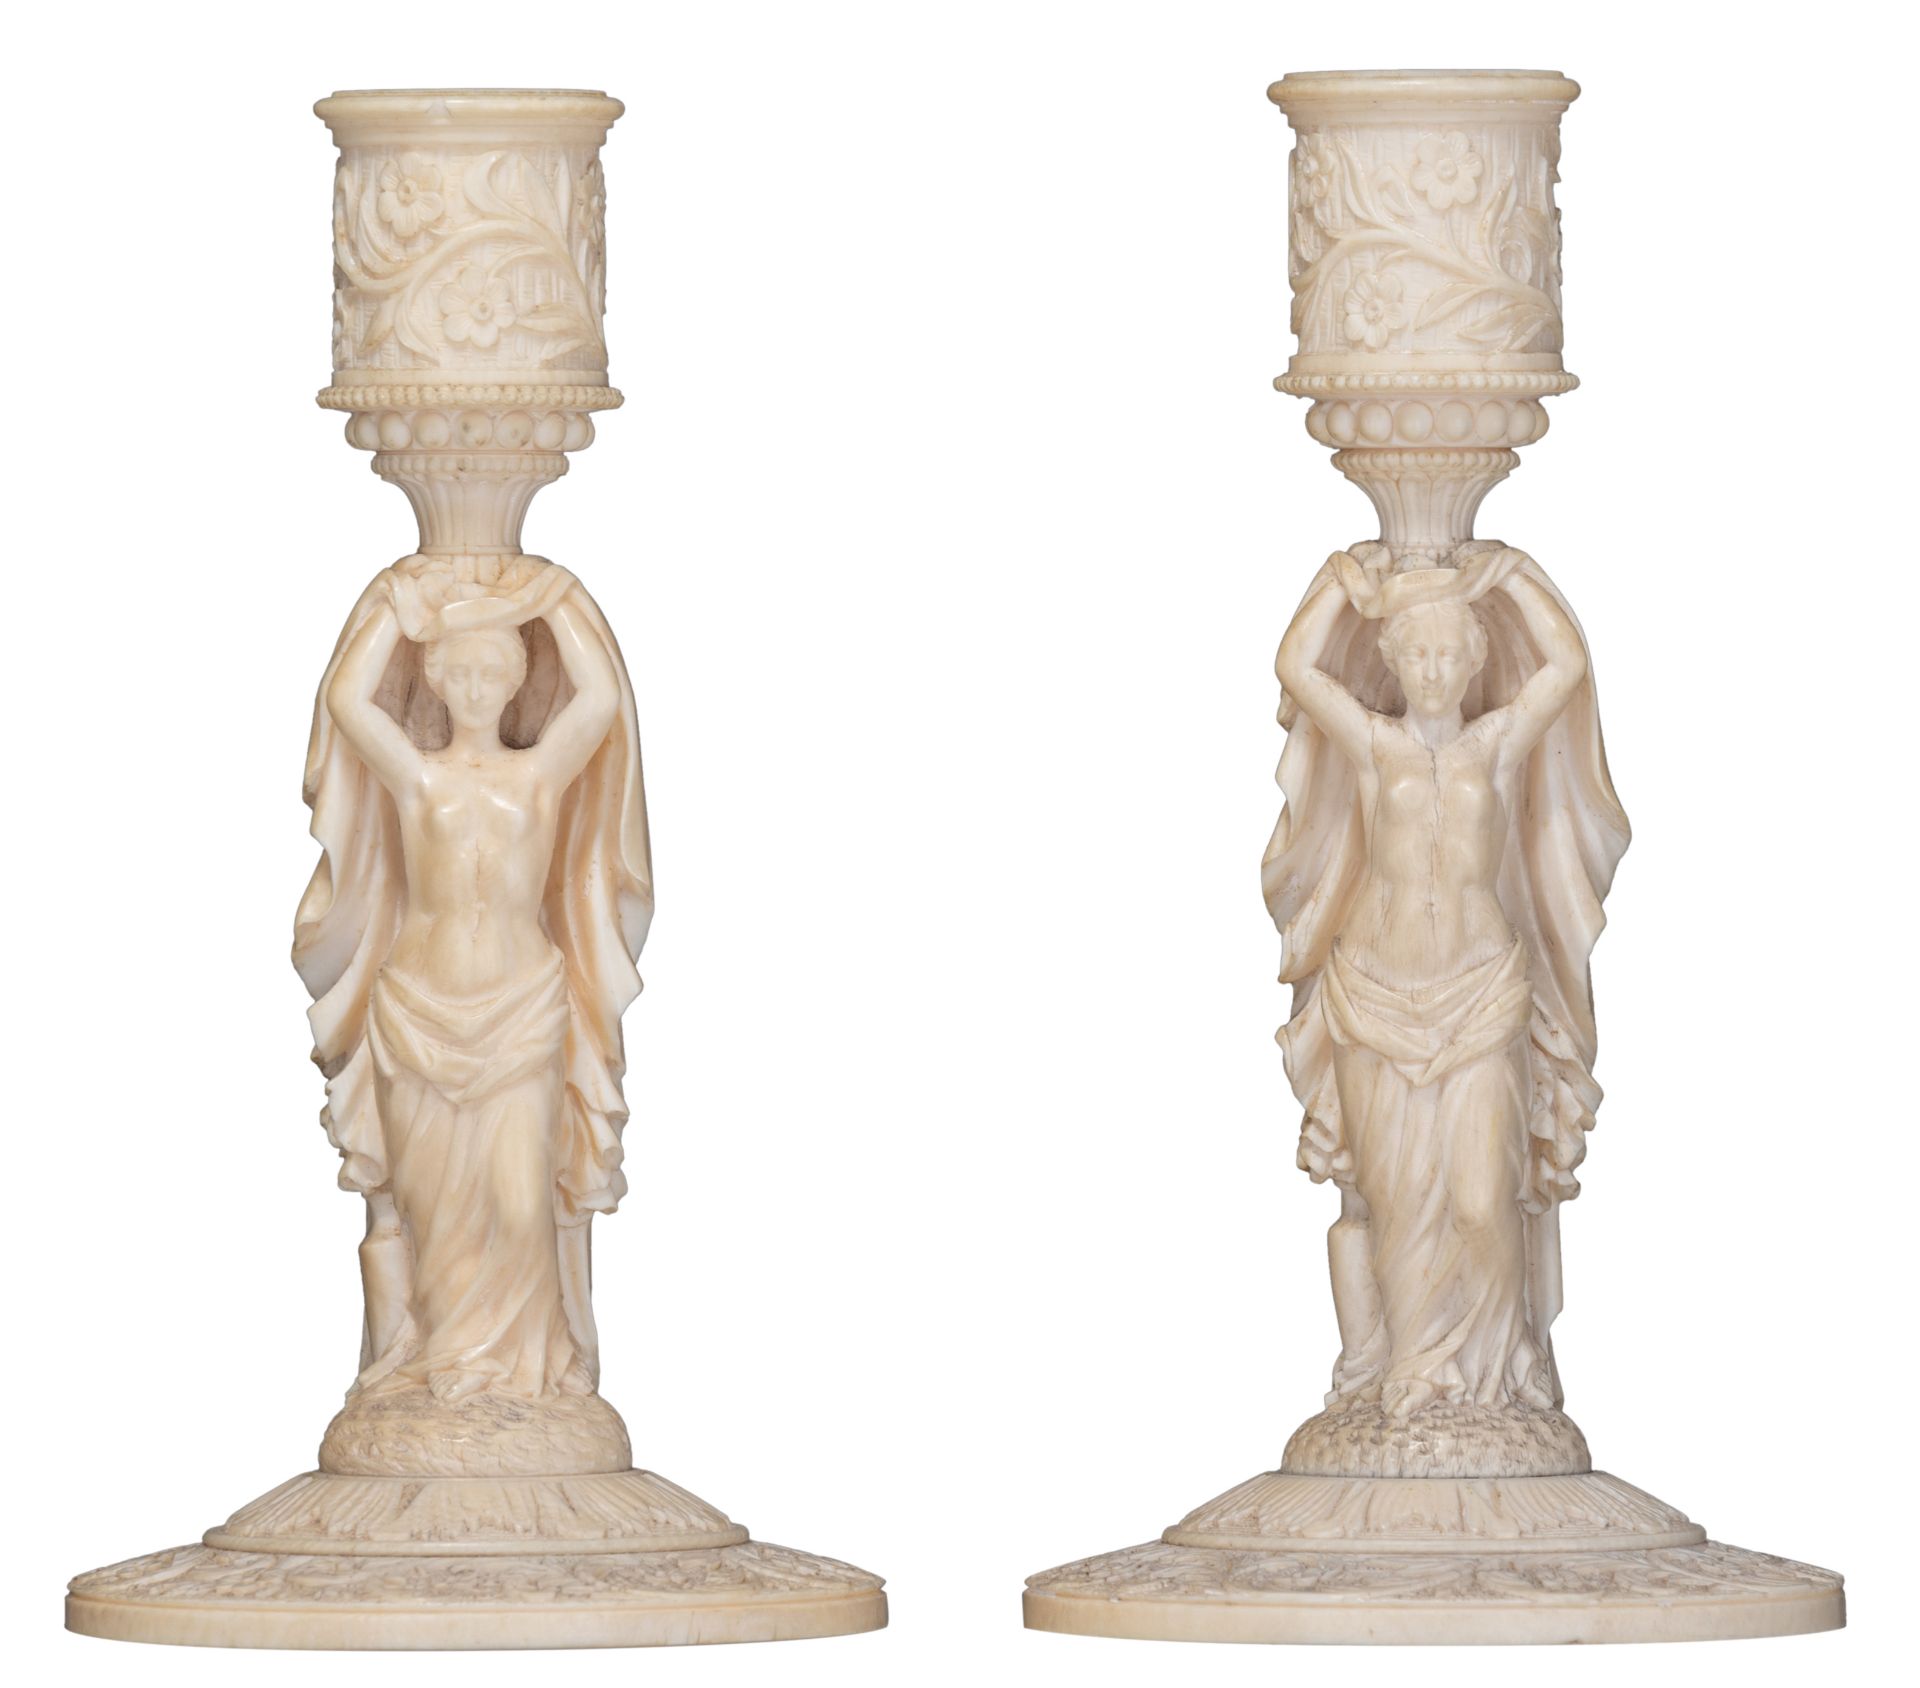 A pair of 19thC Dieppe or Paris ivory candlesticks and a ditto tazza, H 17,2 - 17,4 cm - Image 32 of 32